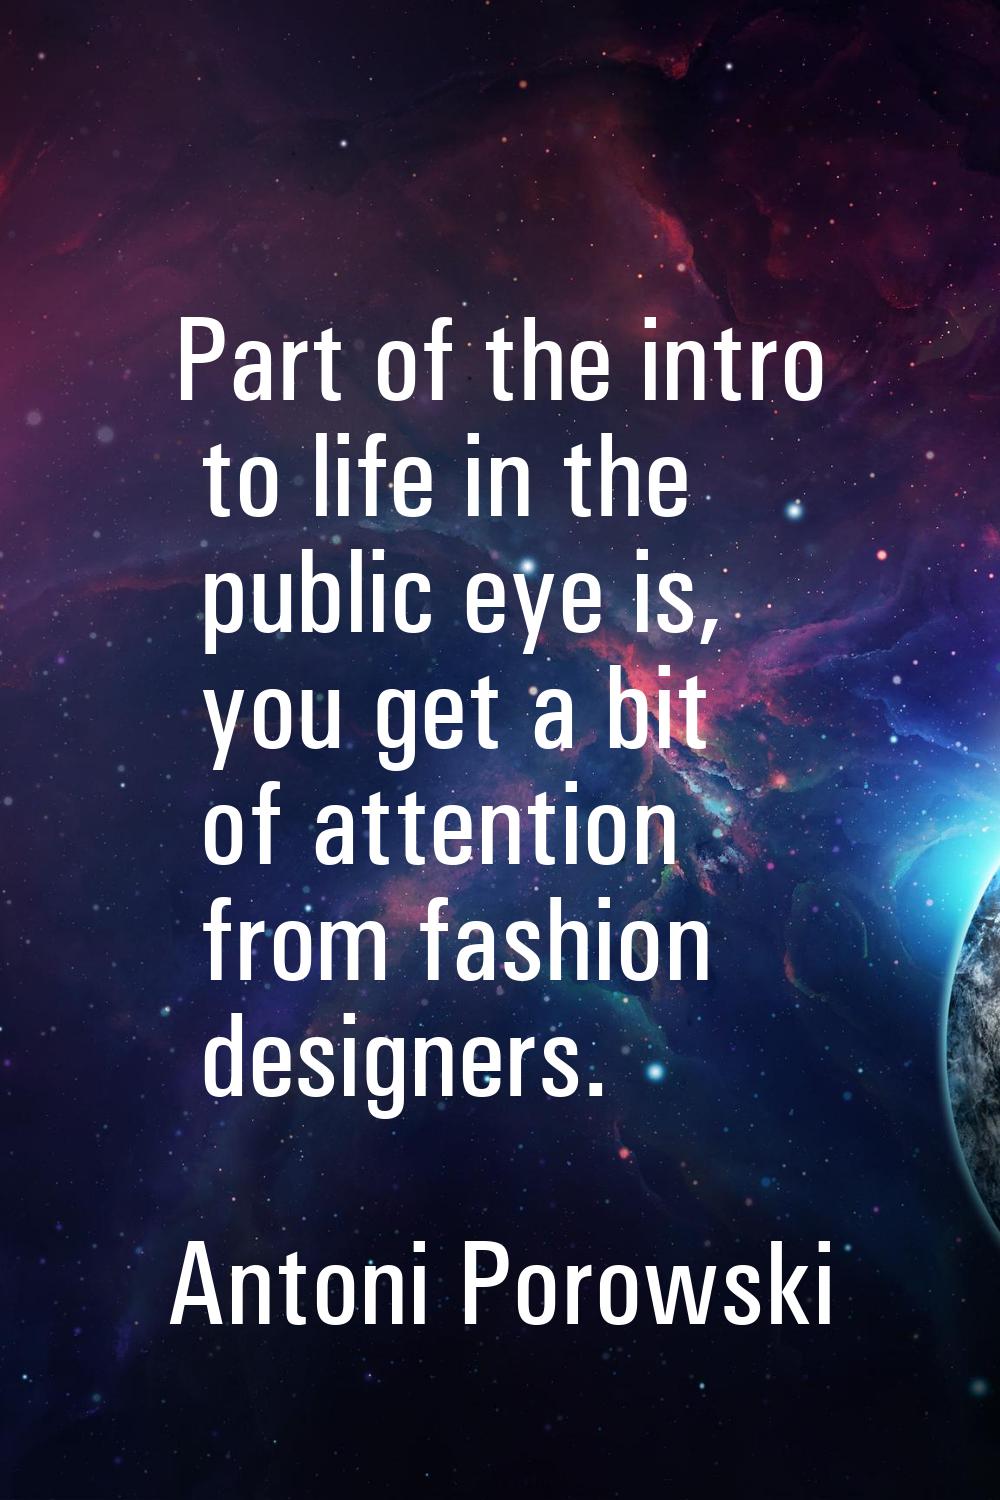 Part of the intro to life in the public eye is, you get a bit of attention from fashion designers.